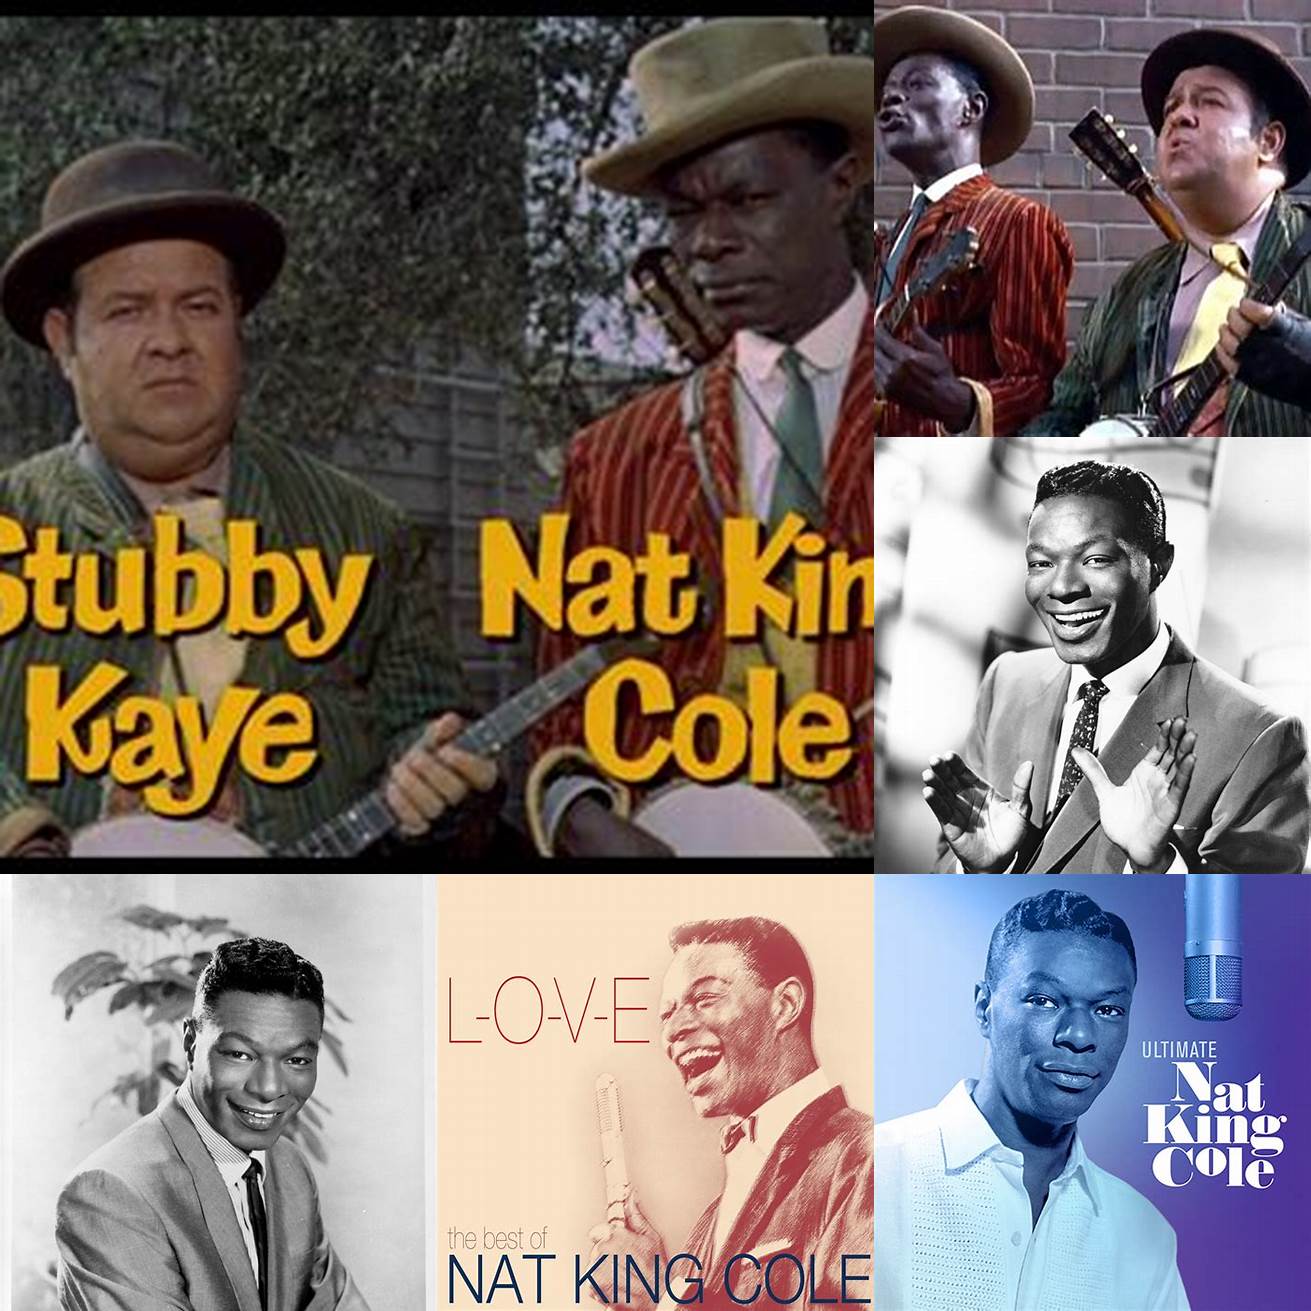 A screenshot of Nat King Cole as the narrator